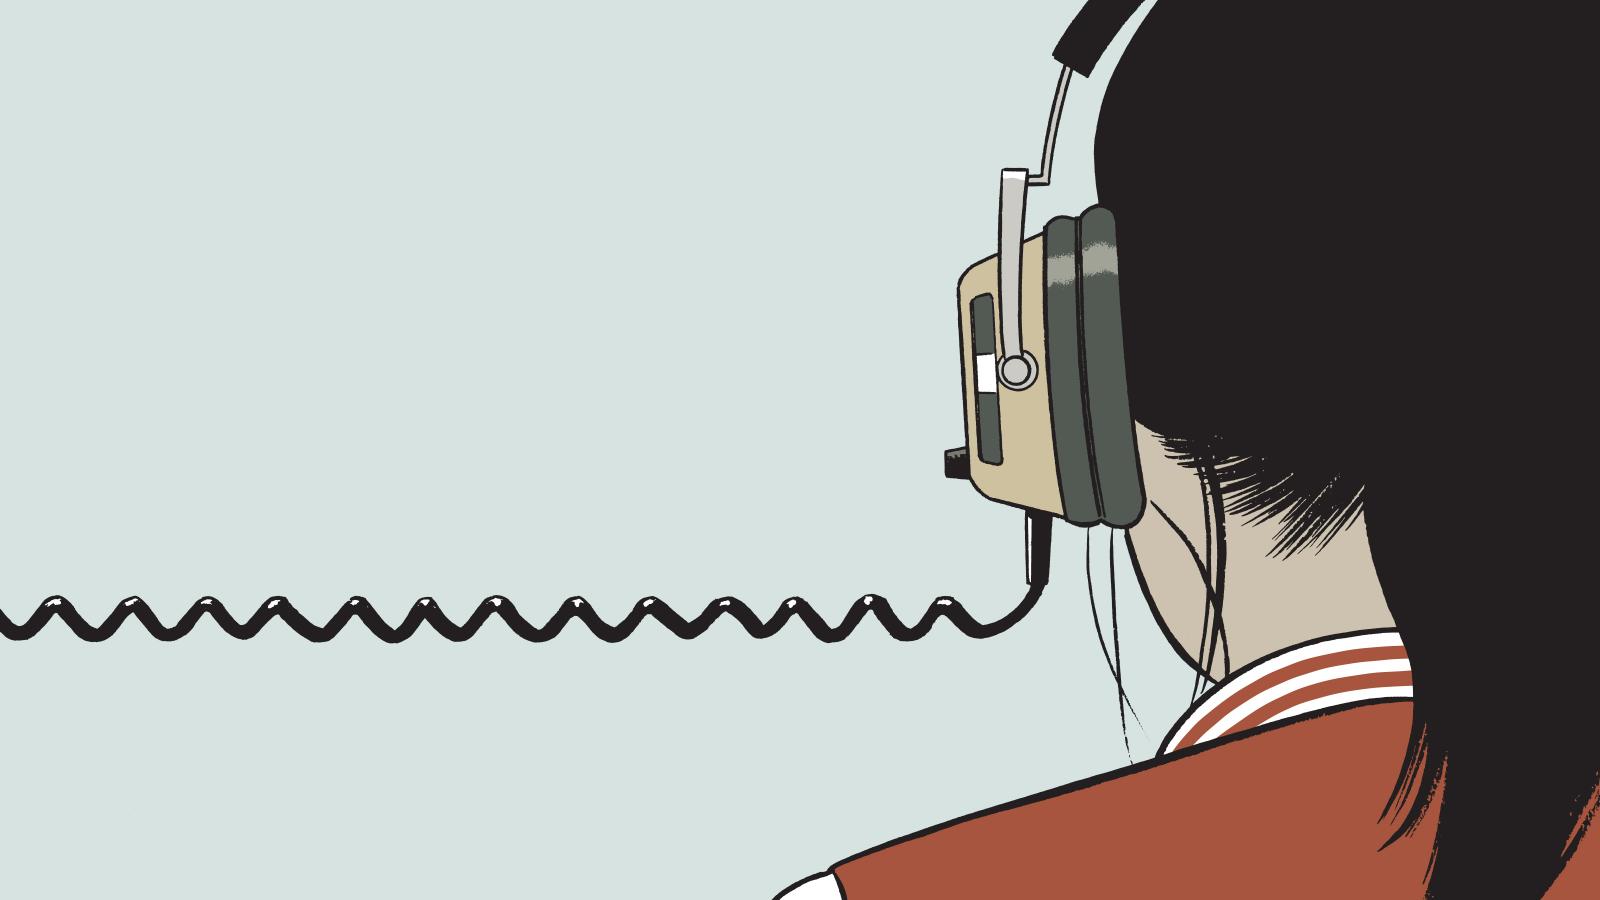 An illustration of the back of a person's head, seen from the shoulders up. They are wearing headphones. 